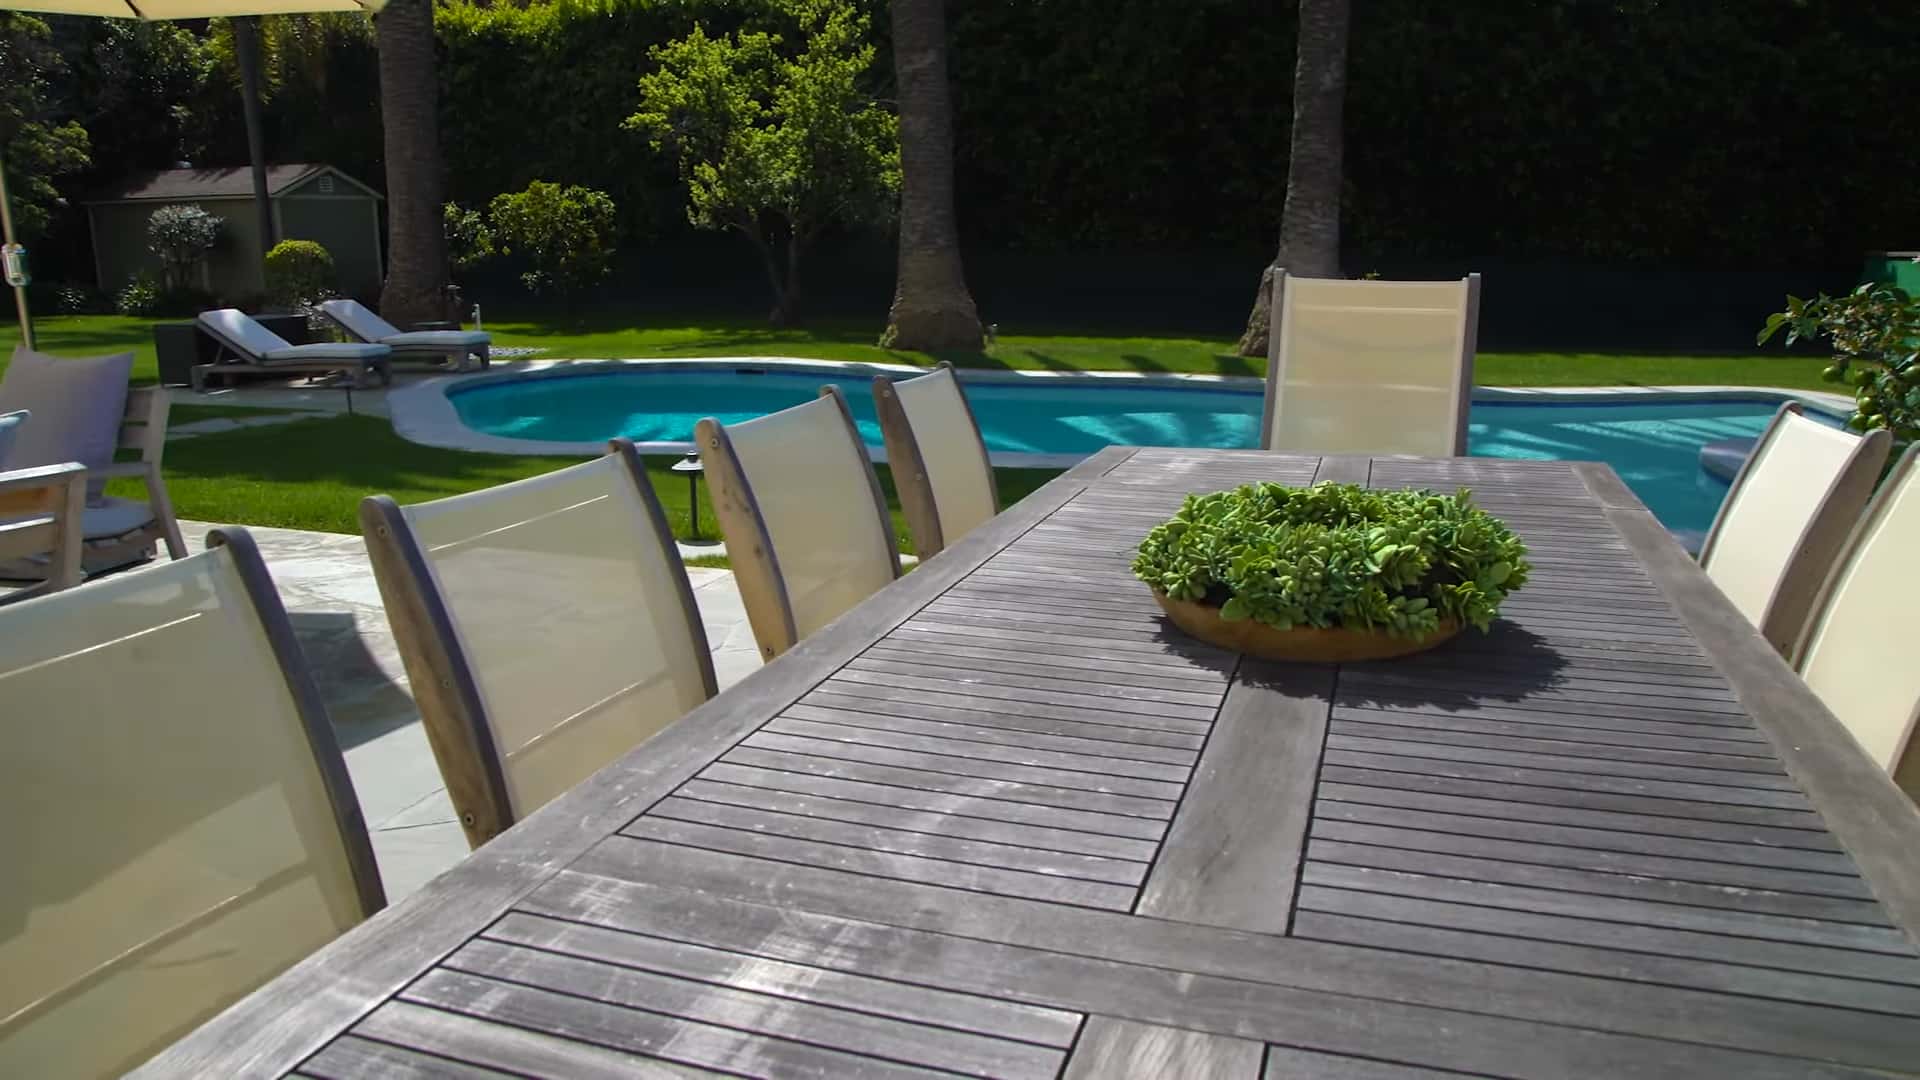 Patrick Dempsey’s outdoor lounge area